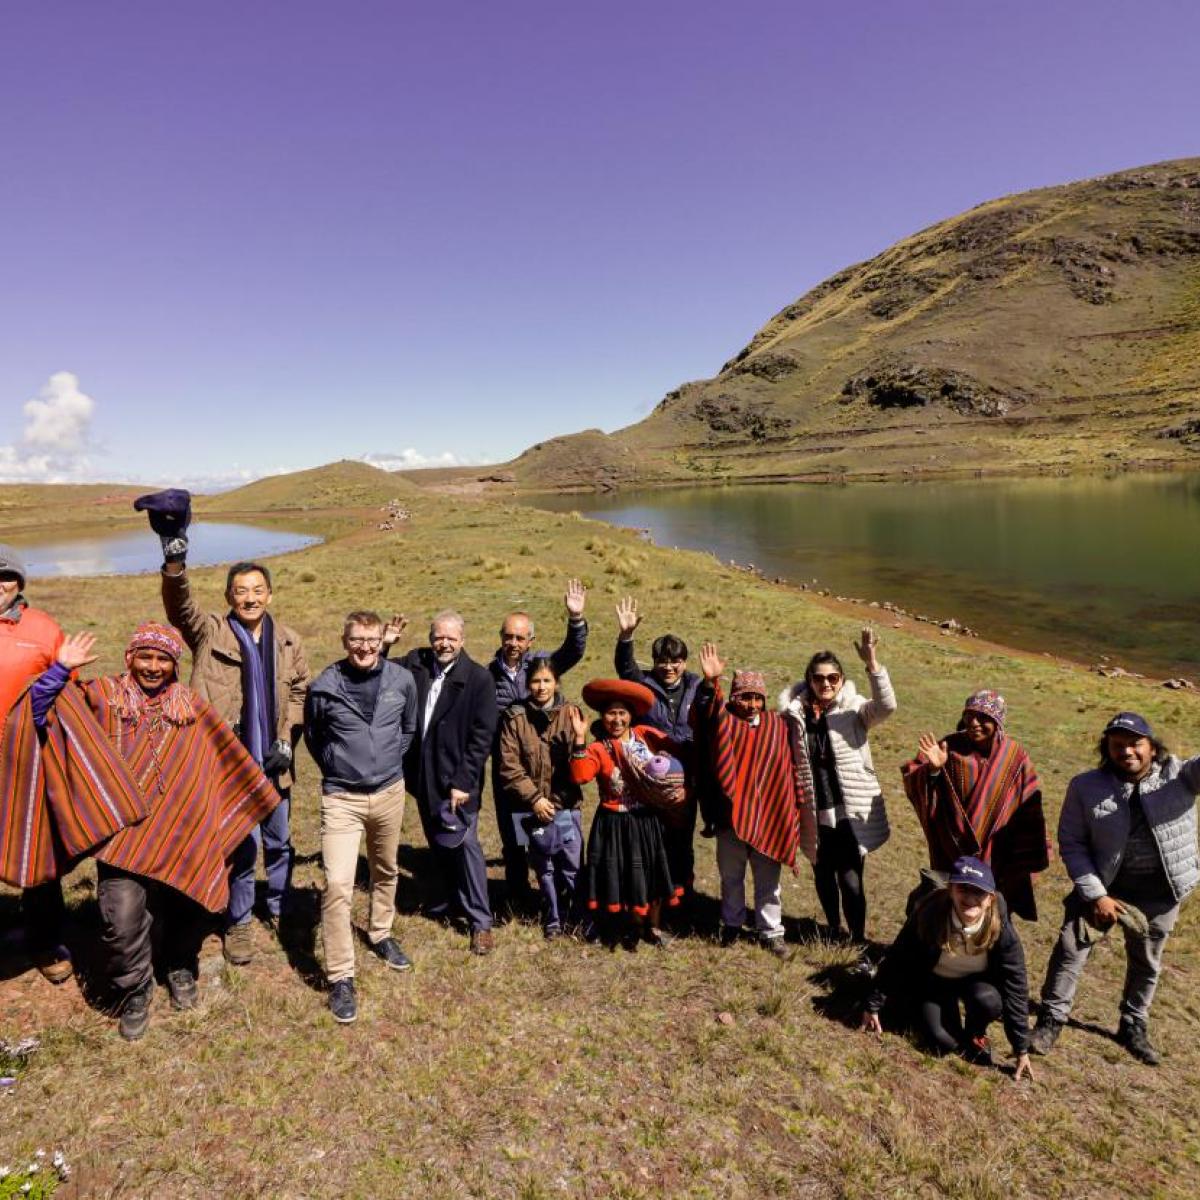 A group of people raising hands in front of an Andean wetland